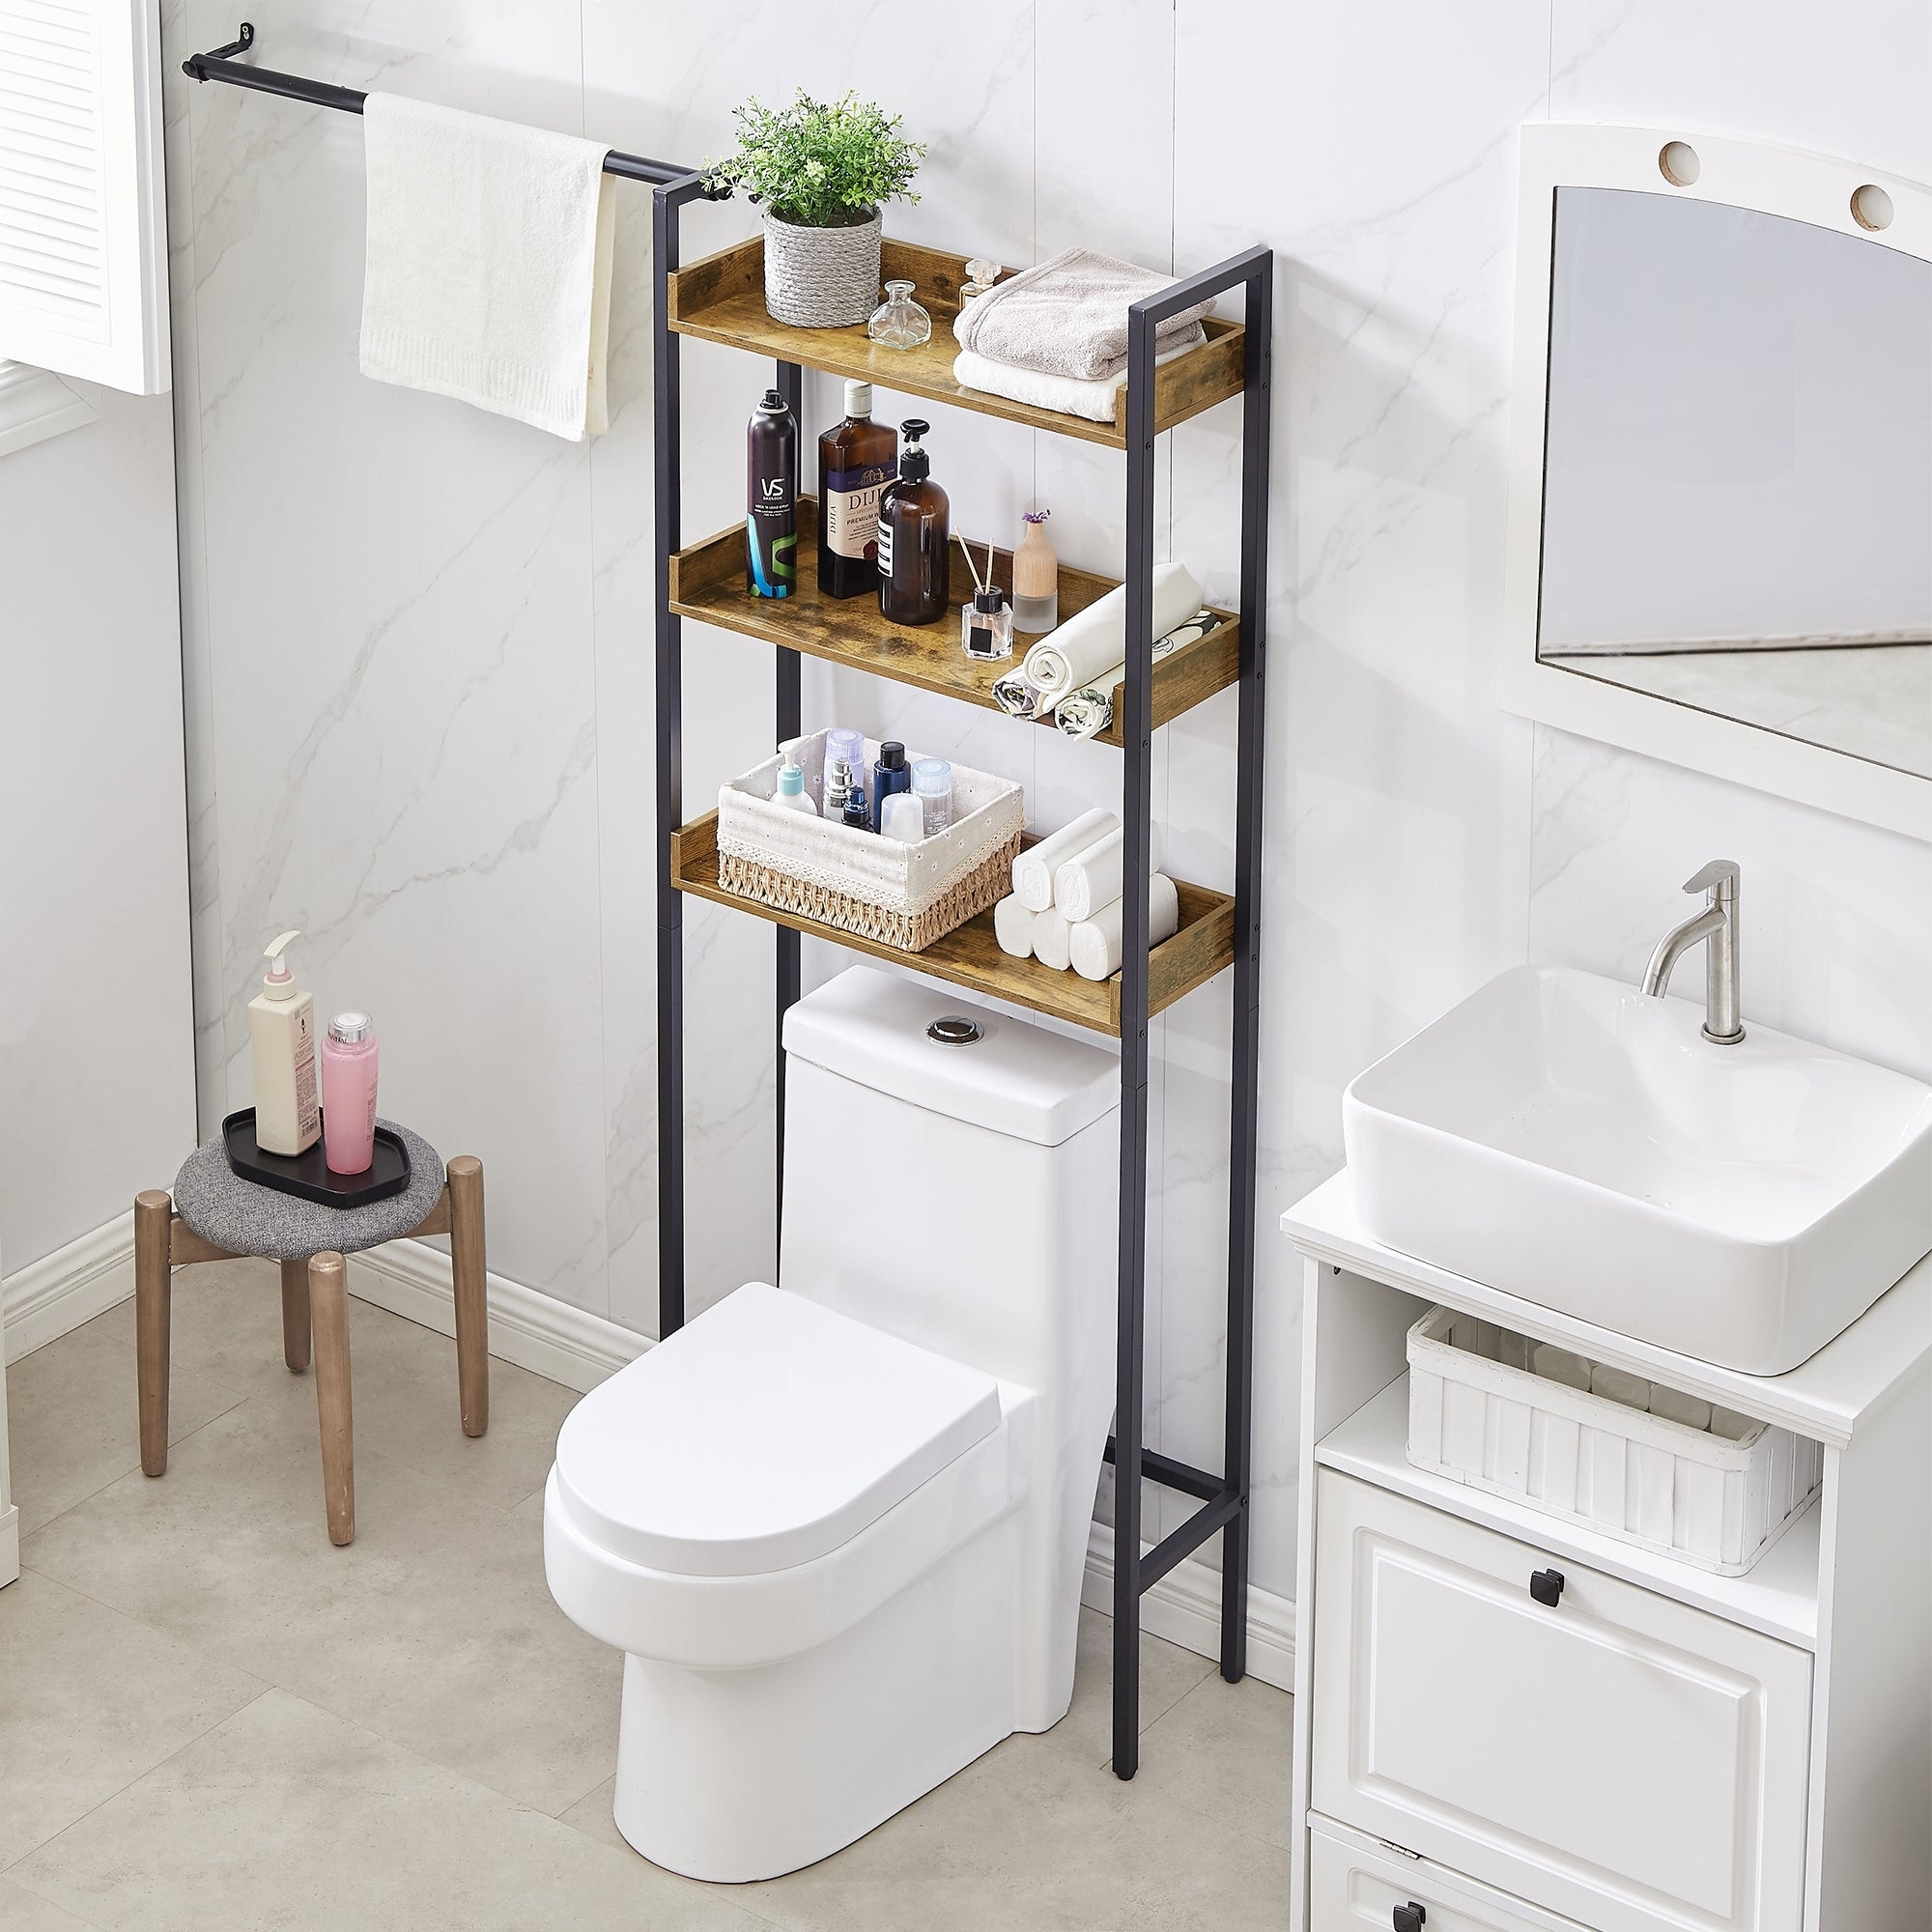 https://ak1.ostkcdn.com/images/products/is/images/direct/9276f142f777b48b2216148966f00b5ffbadcee4/VECELO-Small-Bathroom-Shelf-Over-The-Toilet%2C-Slim-Toilet-Paper-Holder-with-3-Shelves.jpg